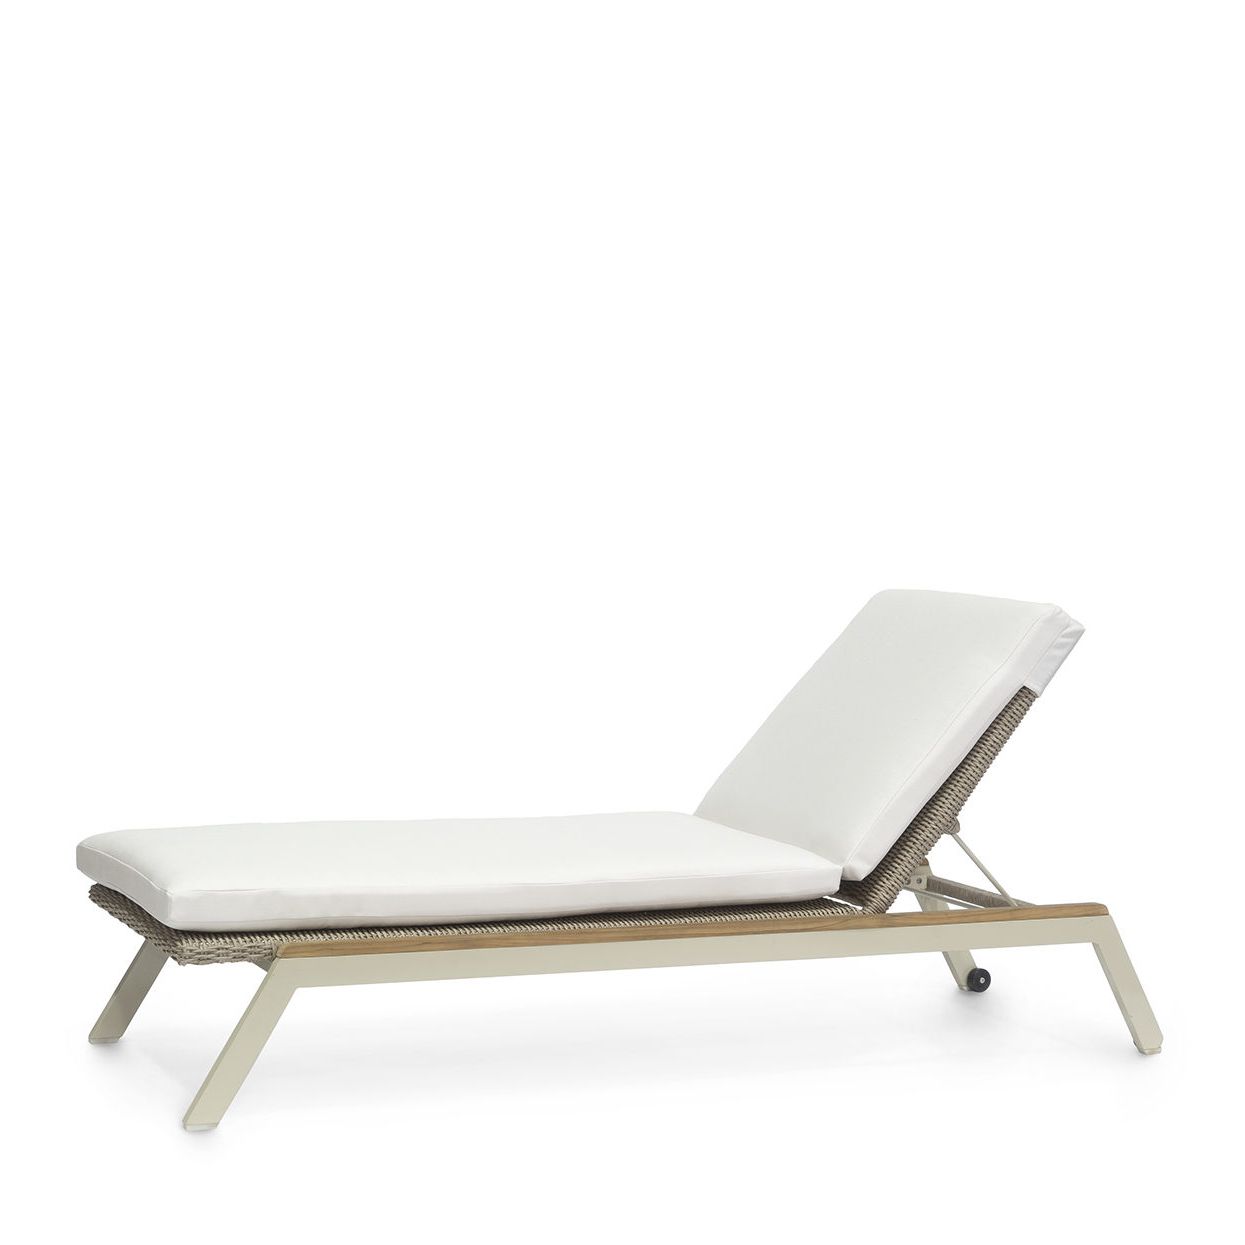 Fashionable Chaise Lounge Chairs In Bronze With Oatmeal Cushions Pertaining To Palecek (View 21 of 25)